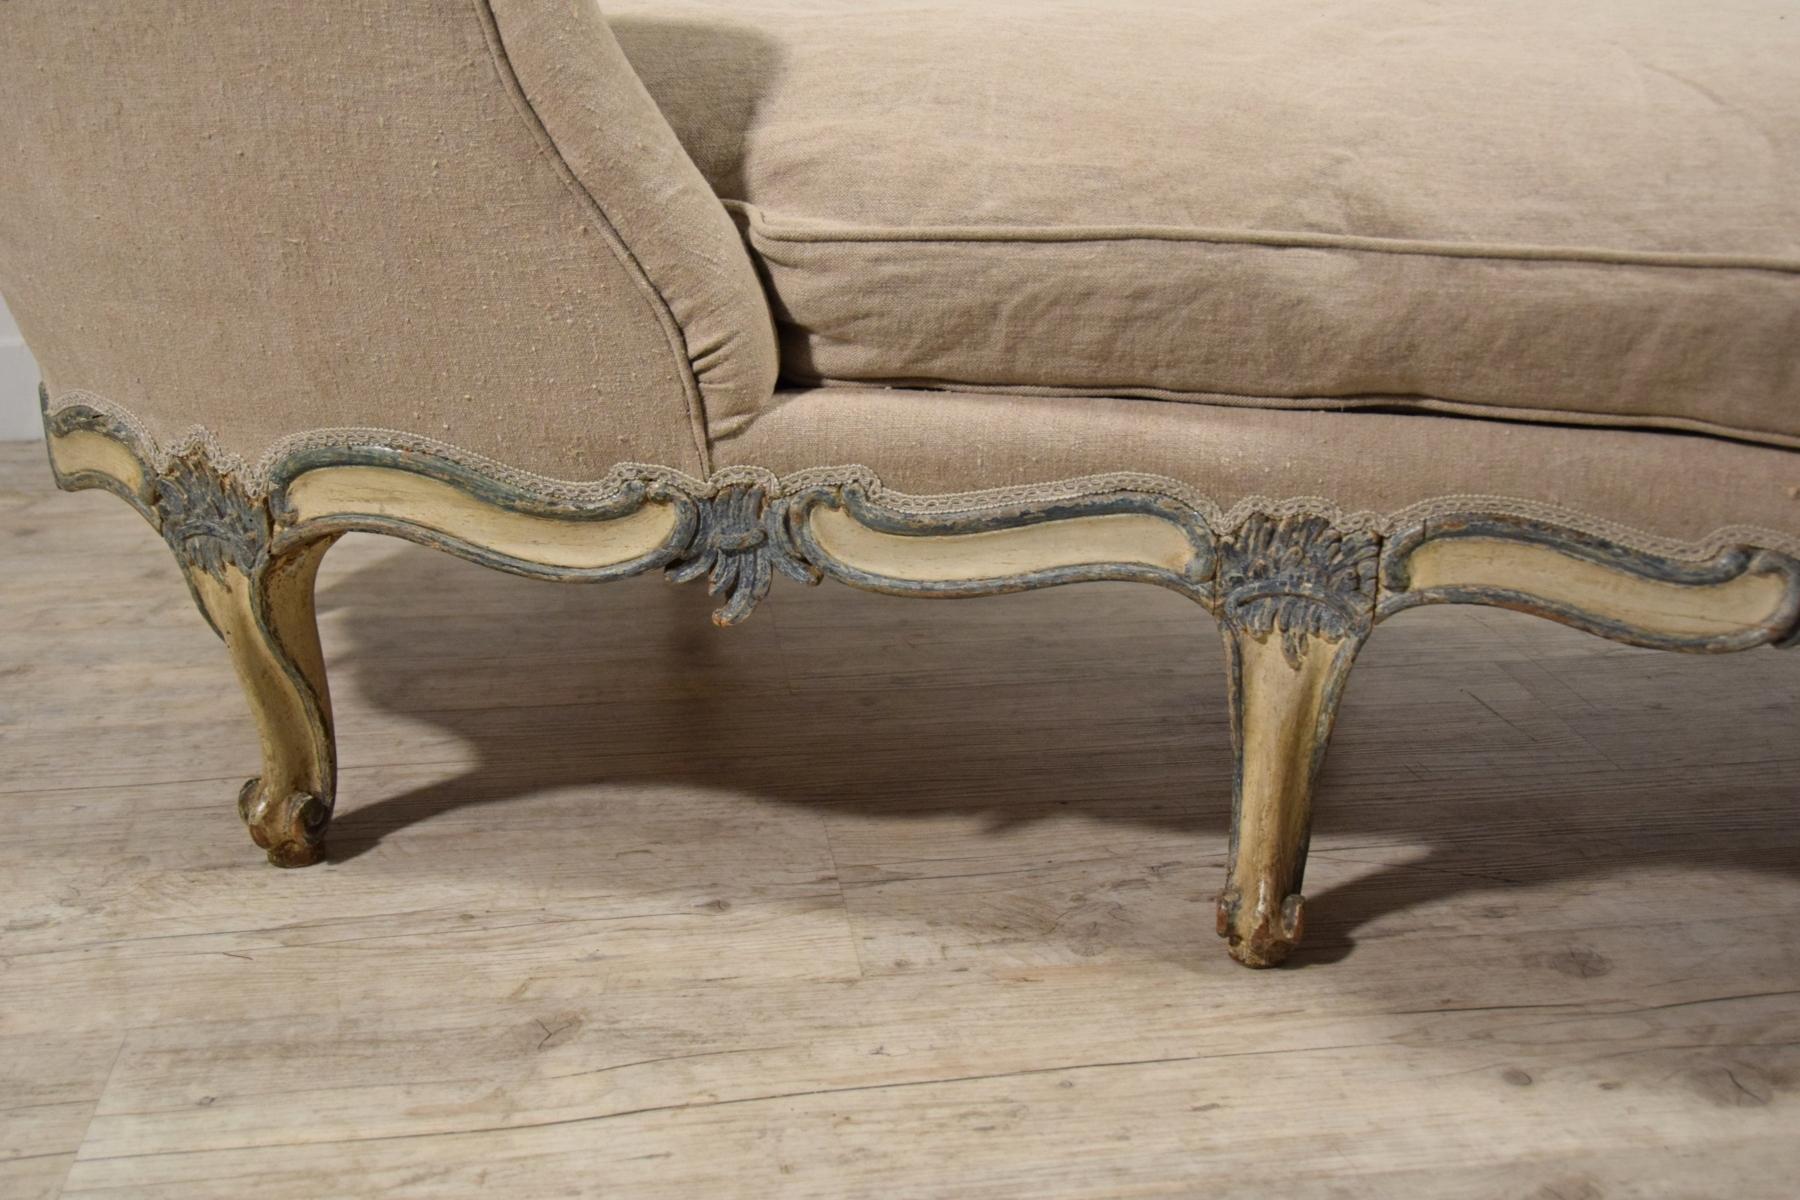 18th Century, Italian Baroque Carved and Lacquered Wood Chaise Longue  4